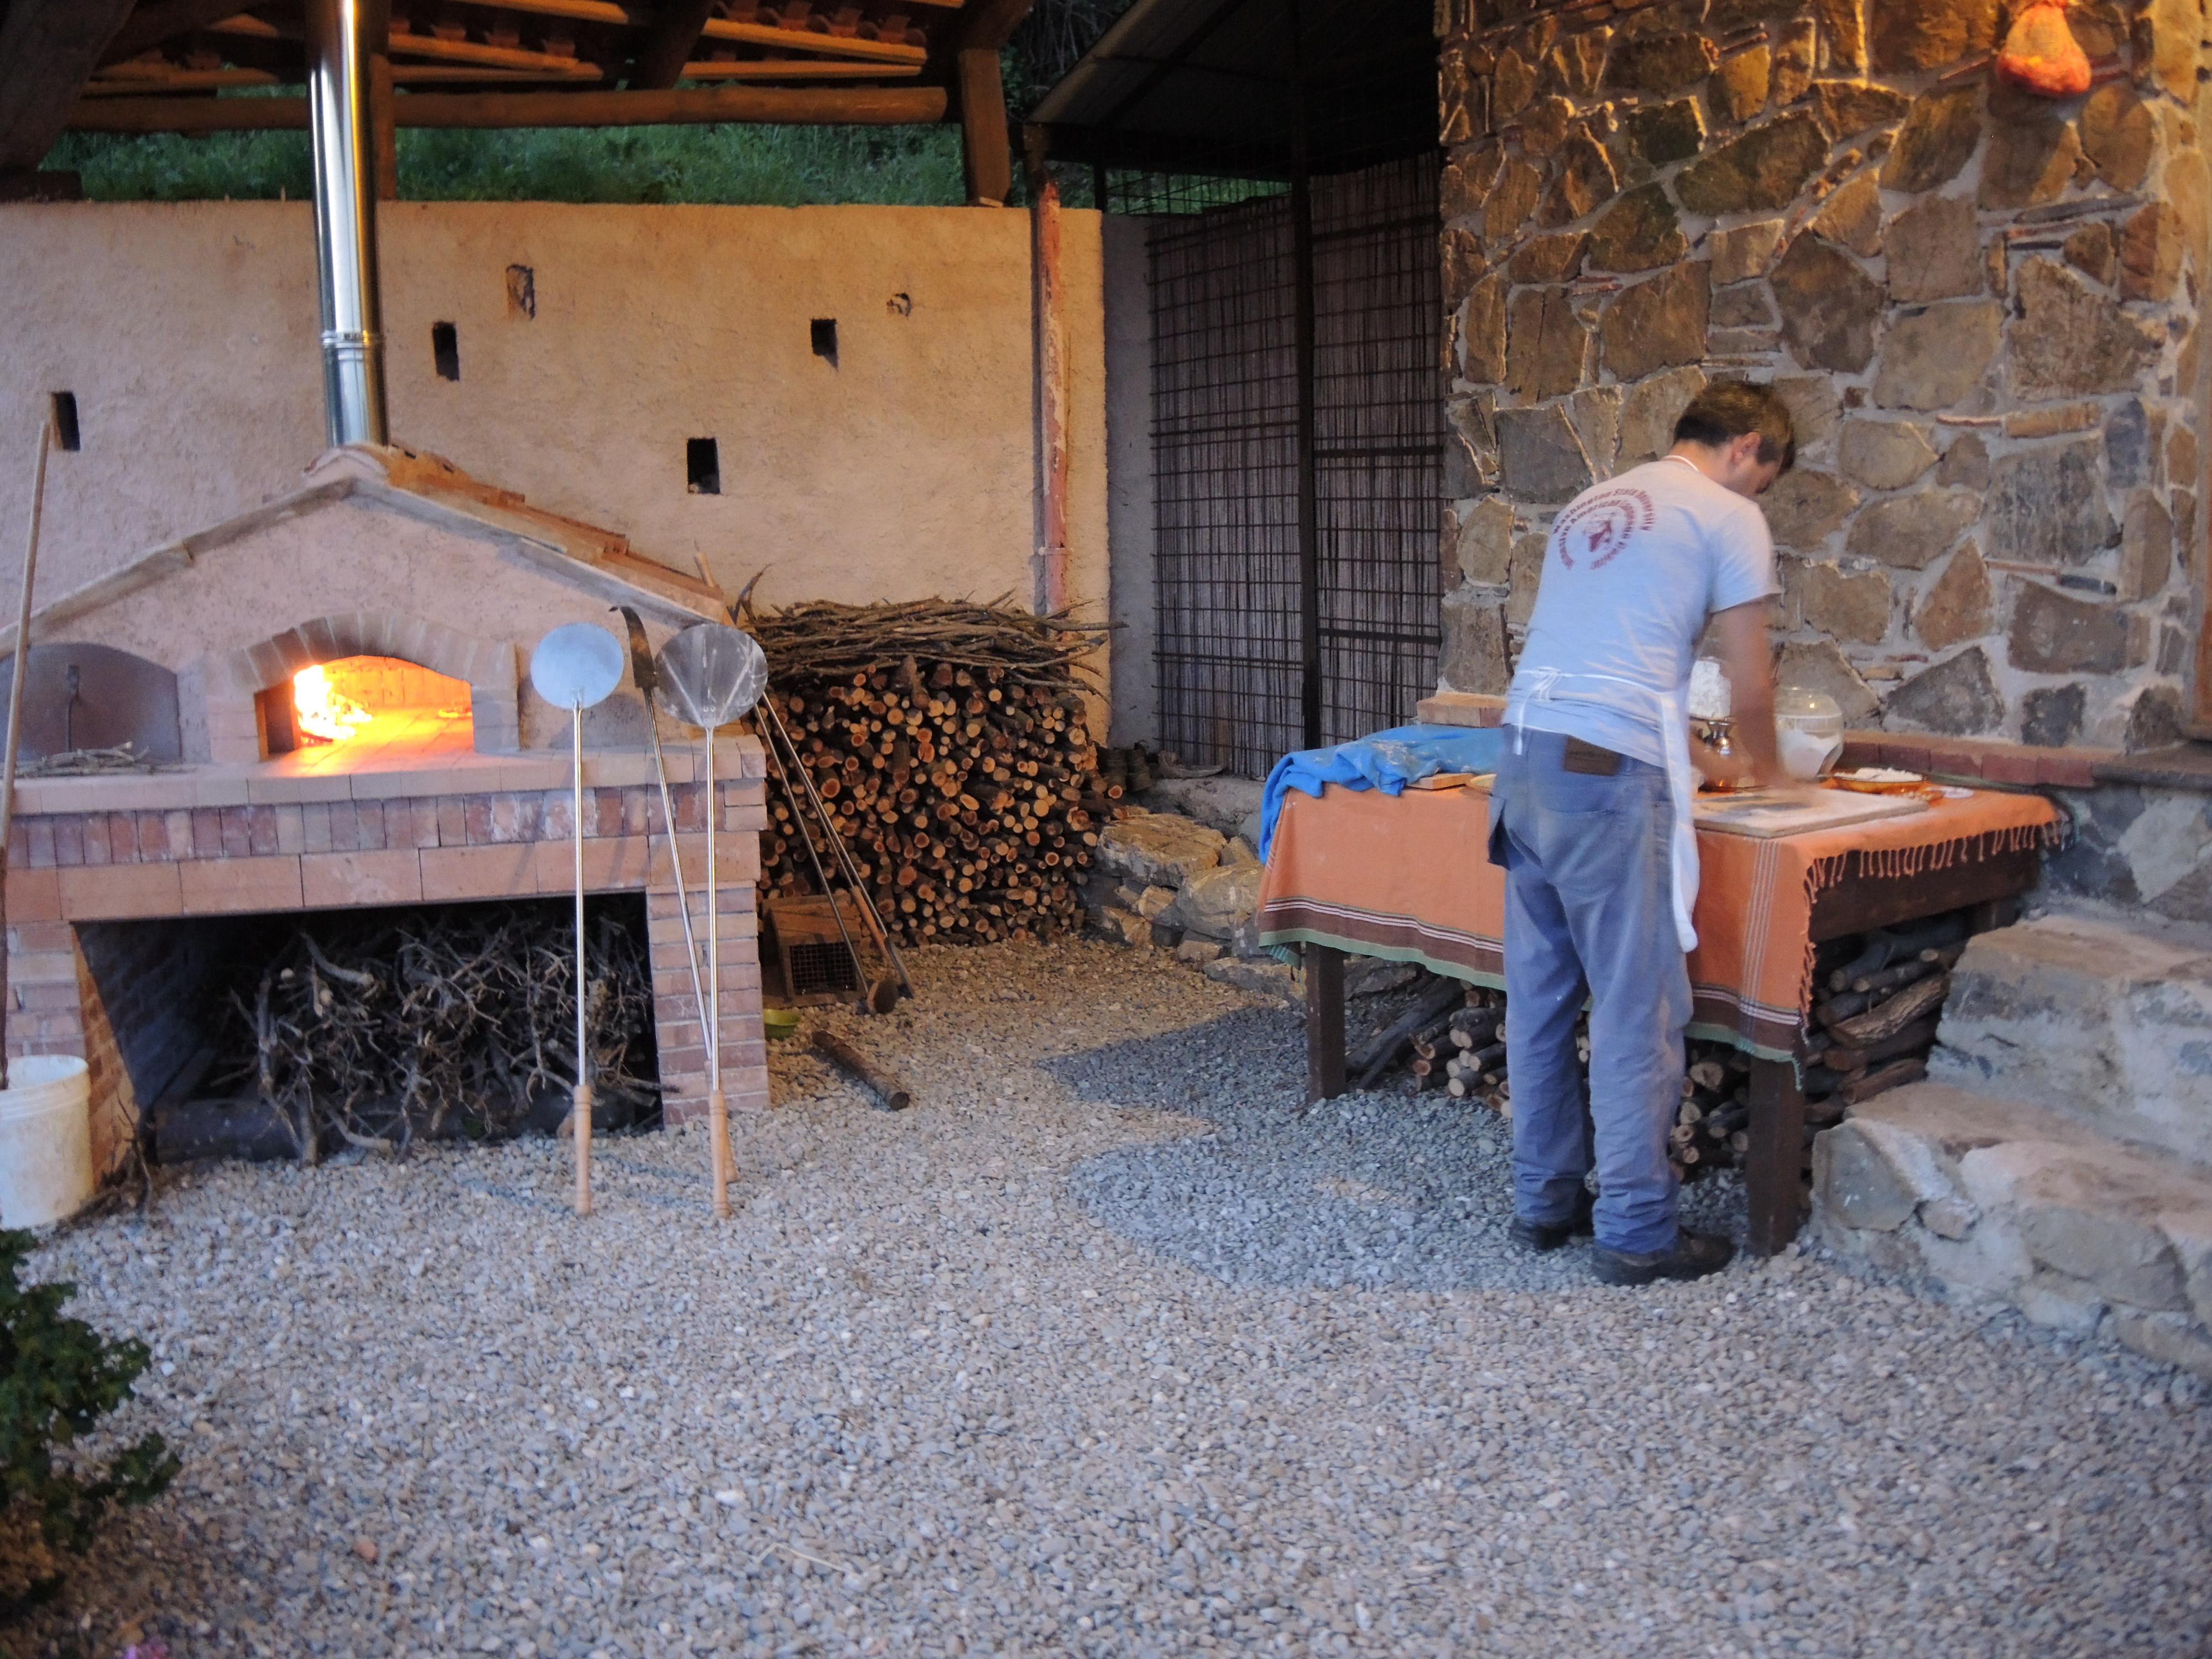 PREPARING PIZZA IN THE TRADITIONAL OVEN